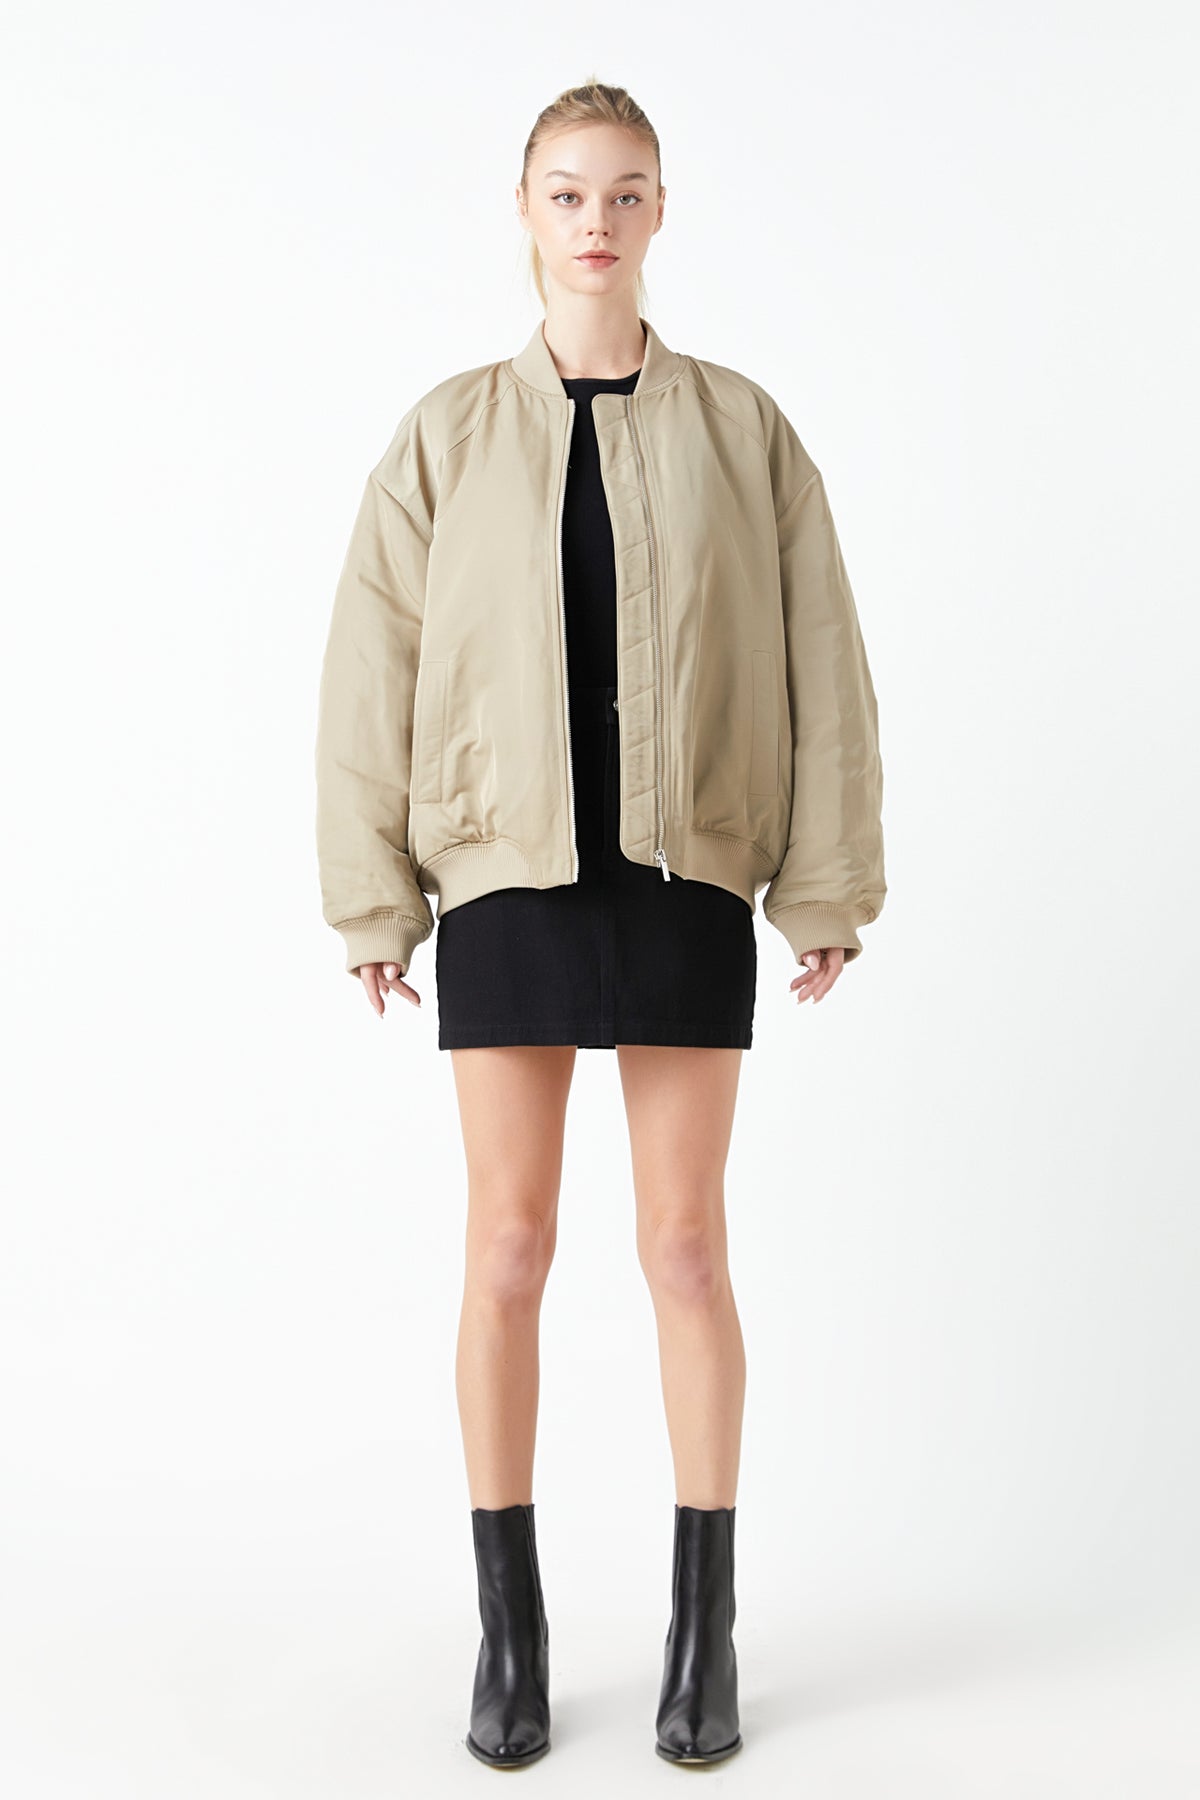 GREY LAB - Ruched Bomber Jacket - JACKETS available at Objectrare